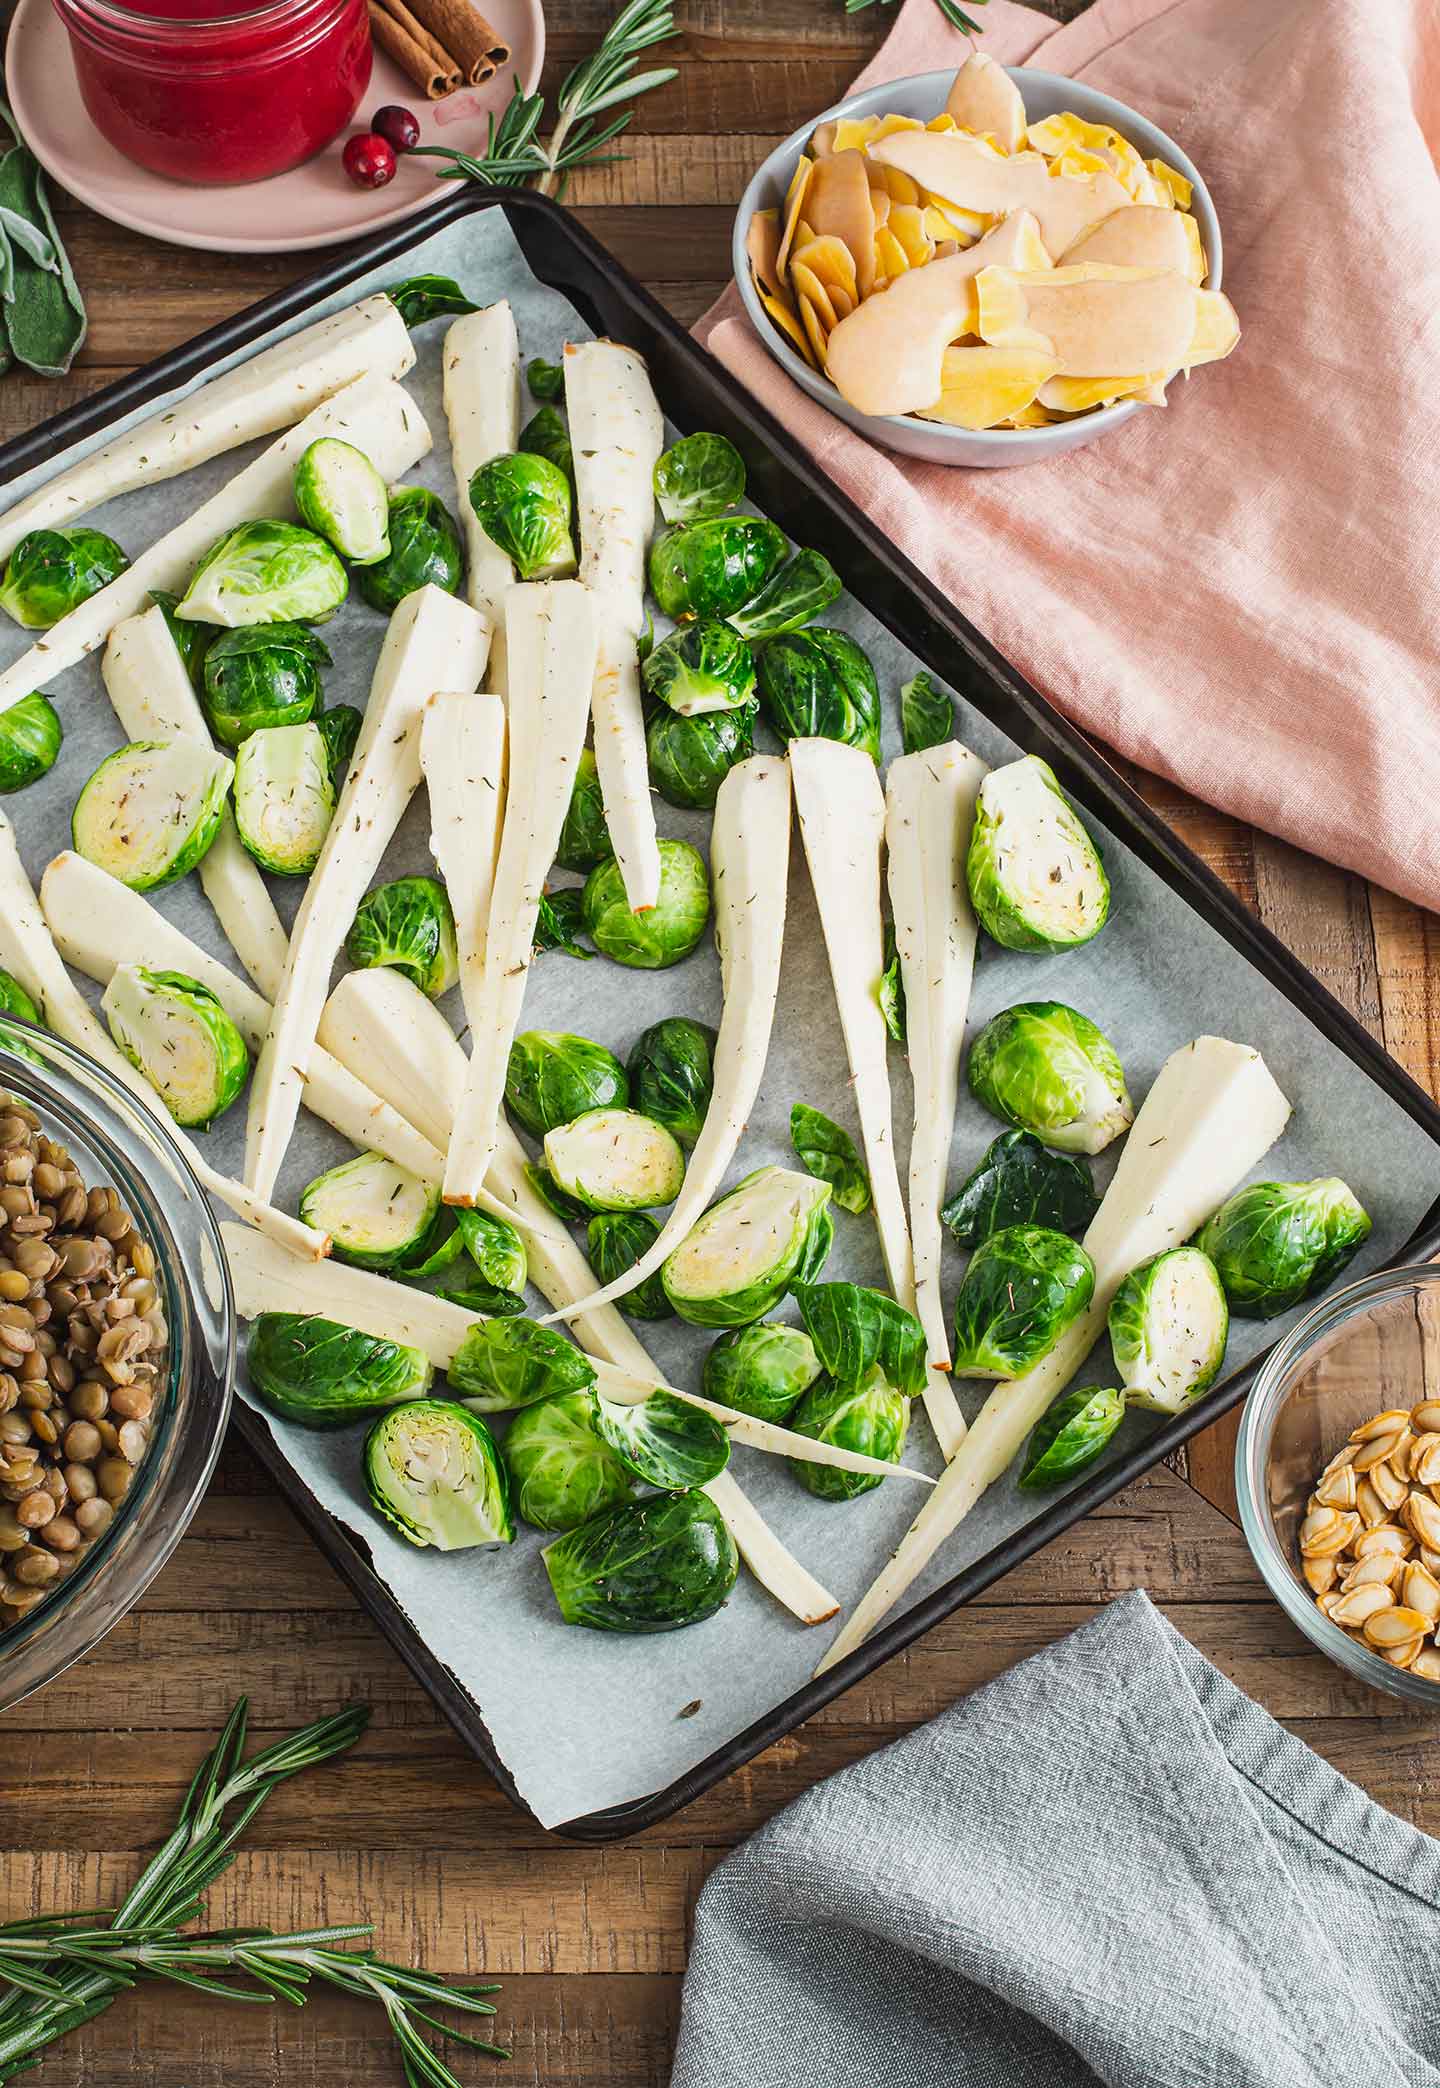 Top down view of sliced brussels sprouts and sliced parsnips on a baking tray lined with parchment paper.